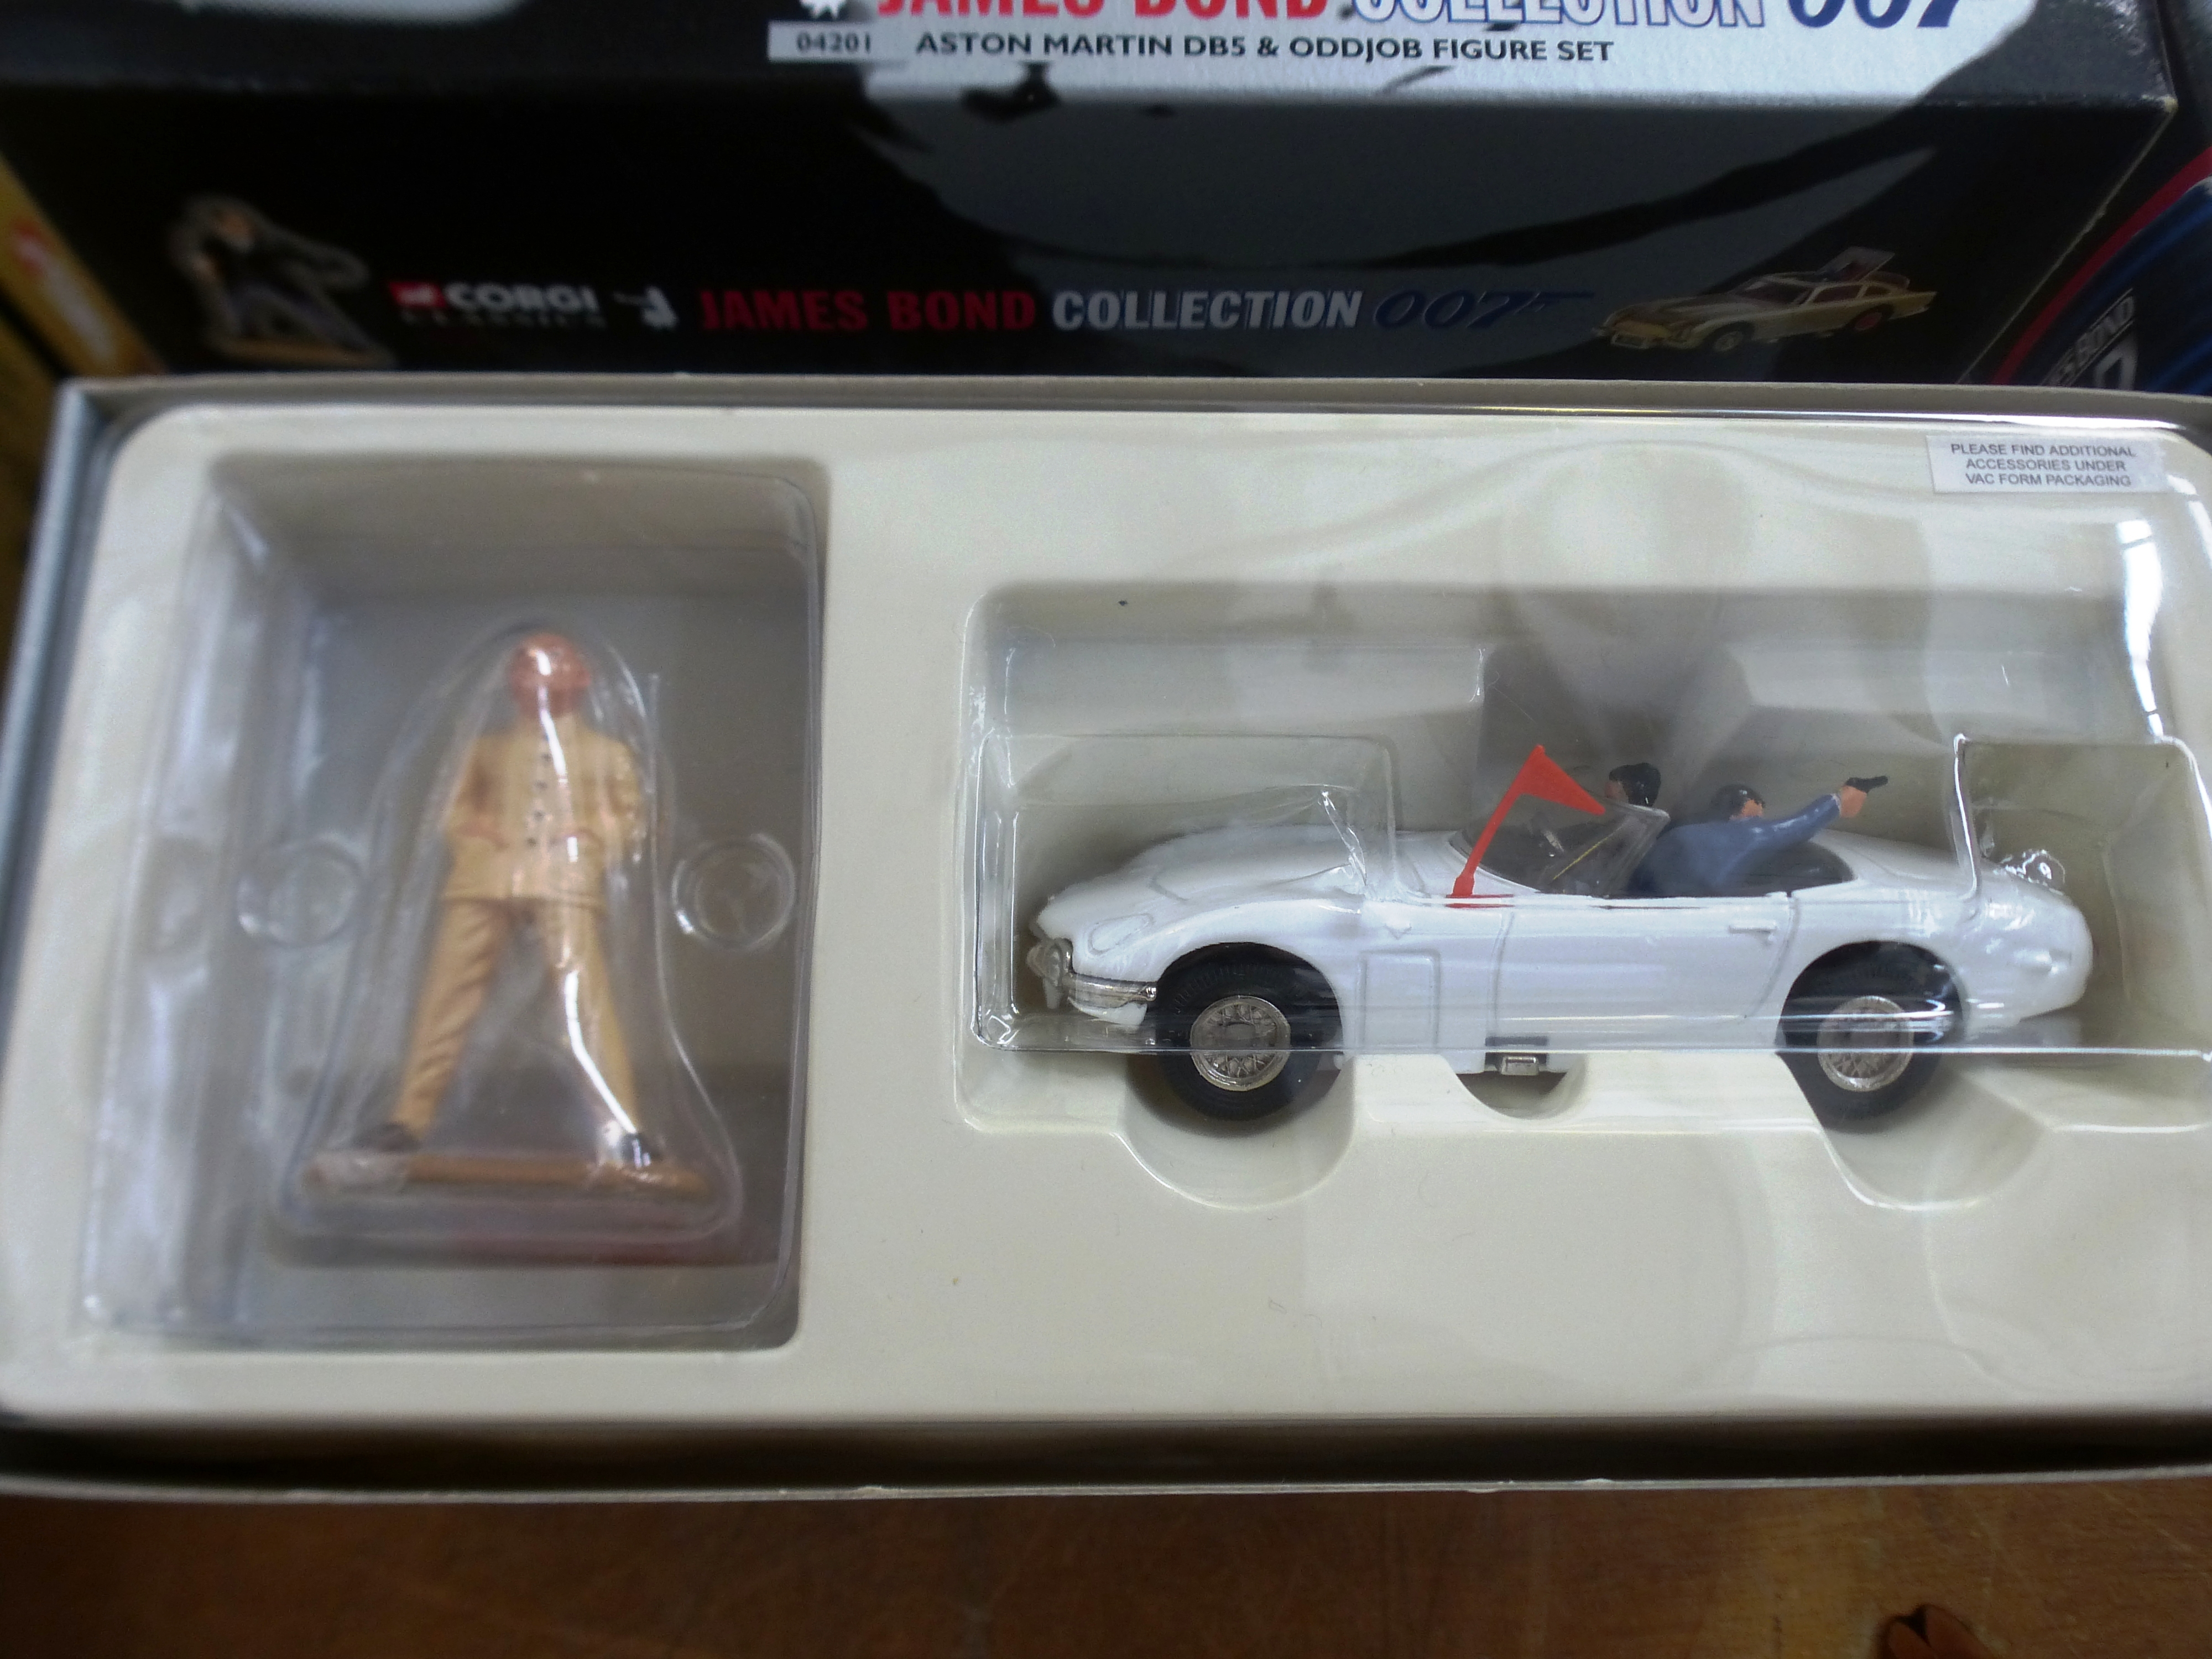 4 BOXED JAMES BOND COLLECTION SETS - 04201, 65101, 65001 AND 65301 - Image 9 of 9